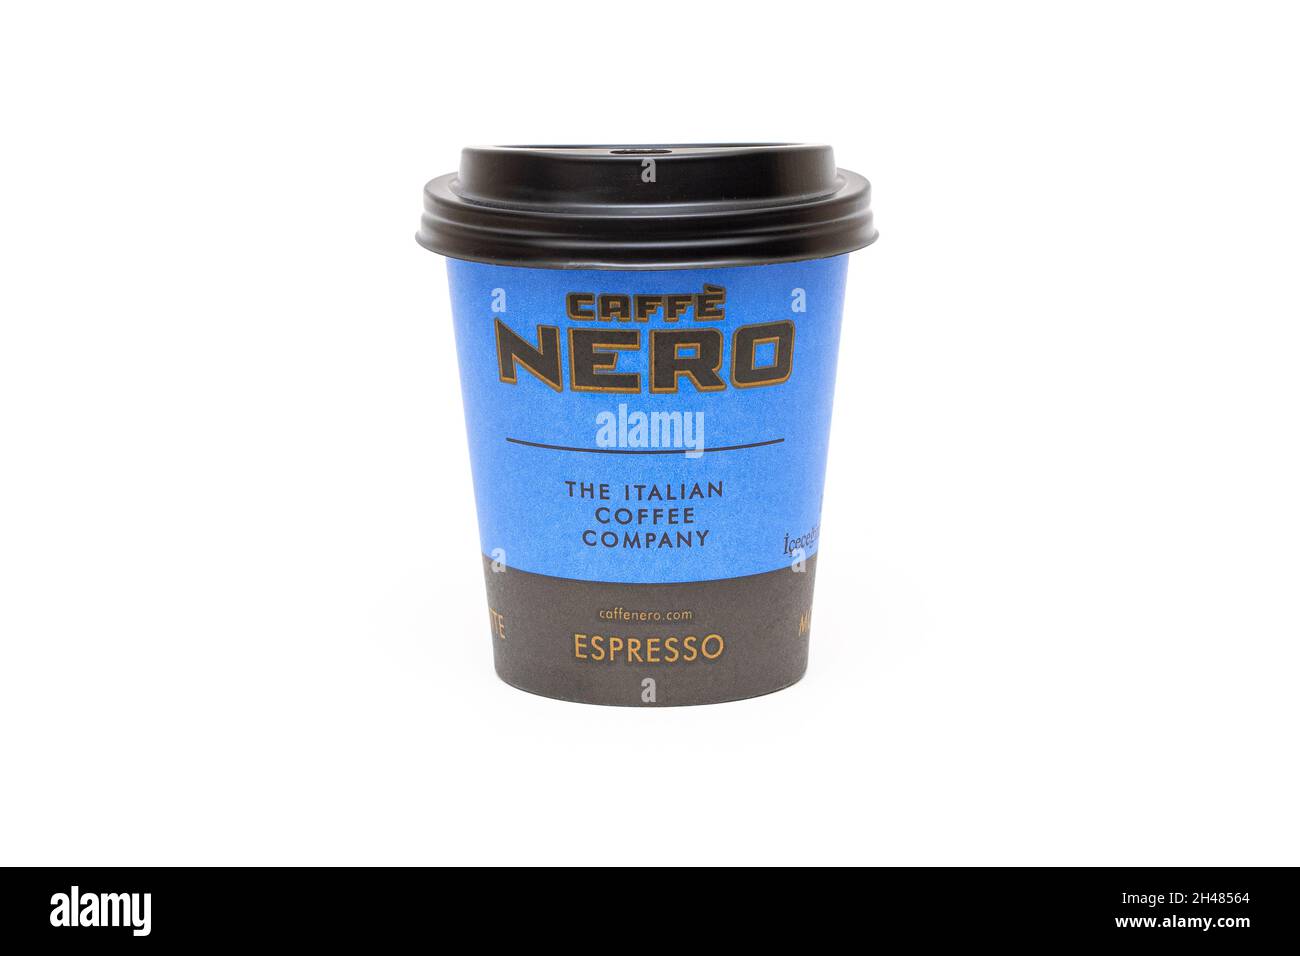 https://c8.alamy.com/comp/2H48564/london-oct-21-paper-cup-with-caffe-nero-logotype-isolated-on-white-october-21-2021-in-uk-nero-is-a-british-coffeehouse-company-headquartered-in-2H48564.jpg